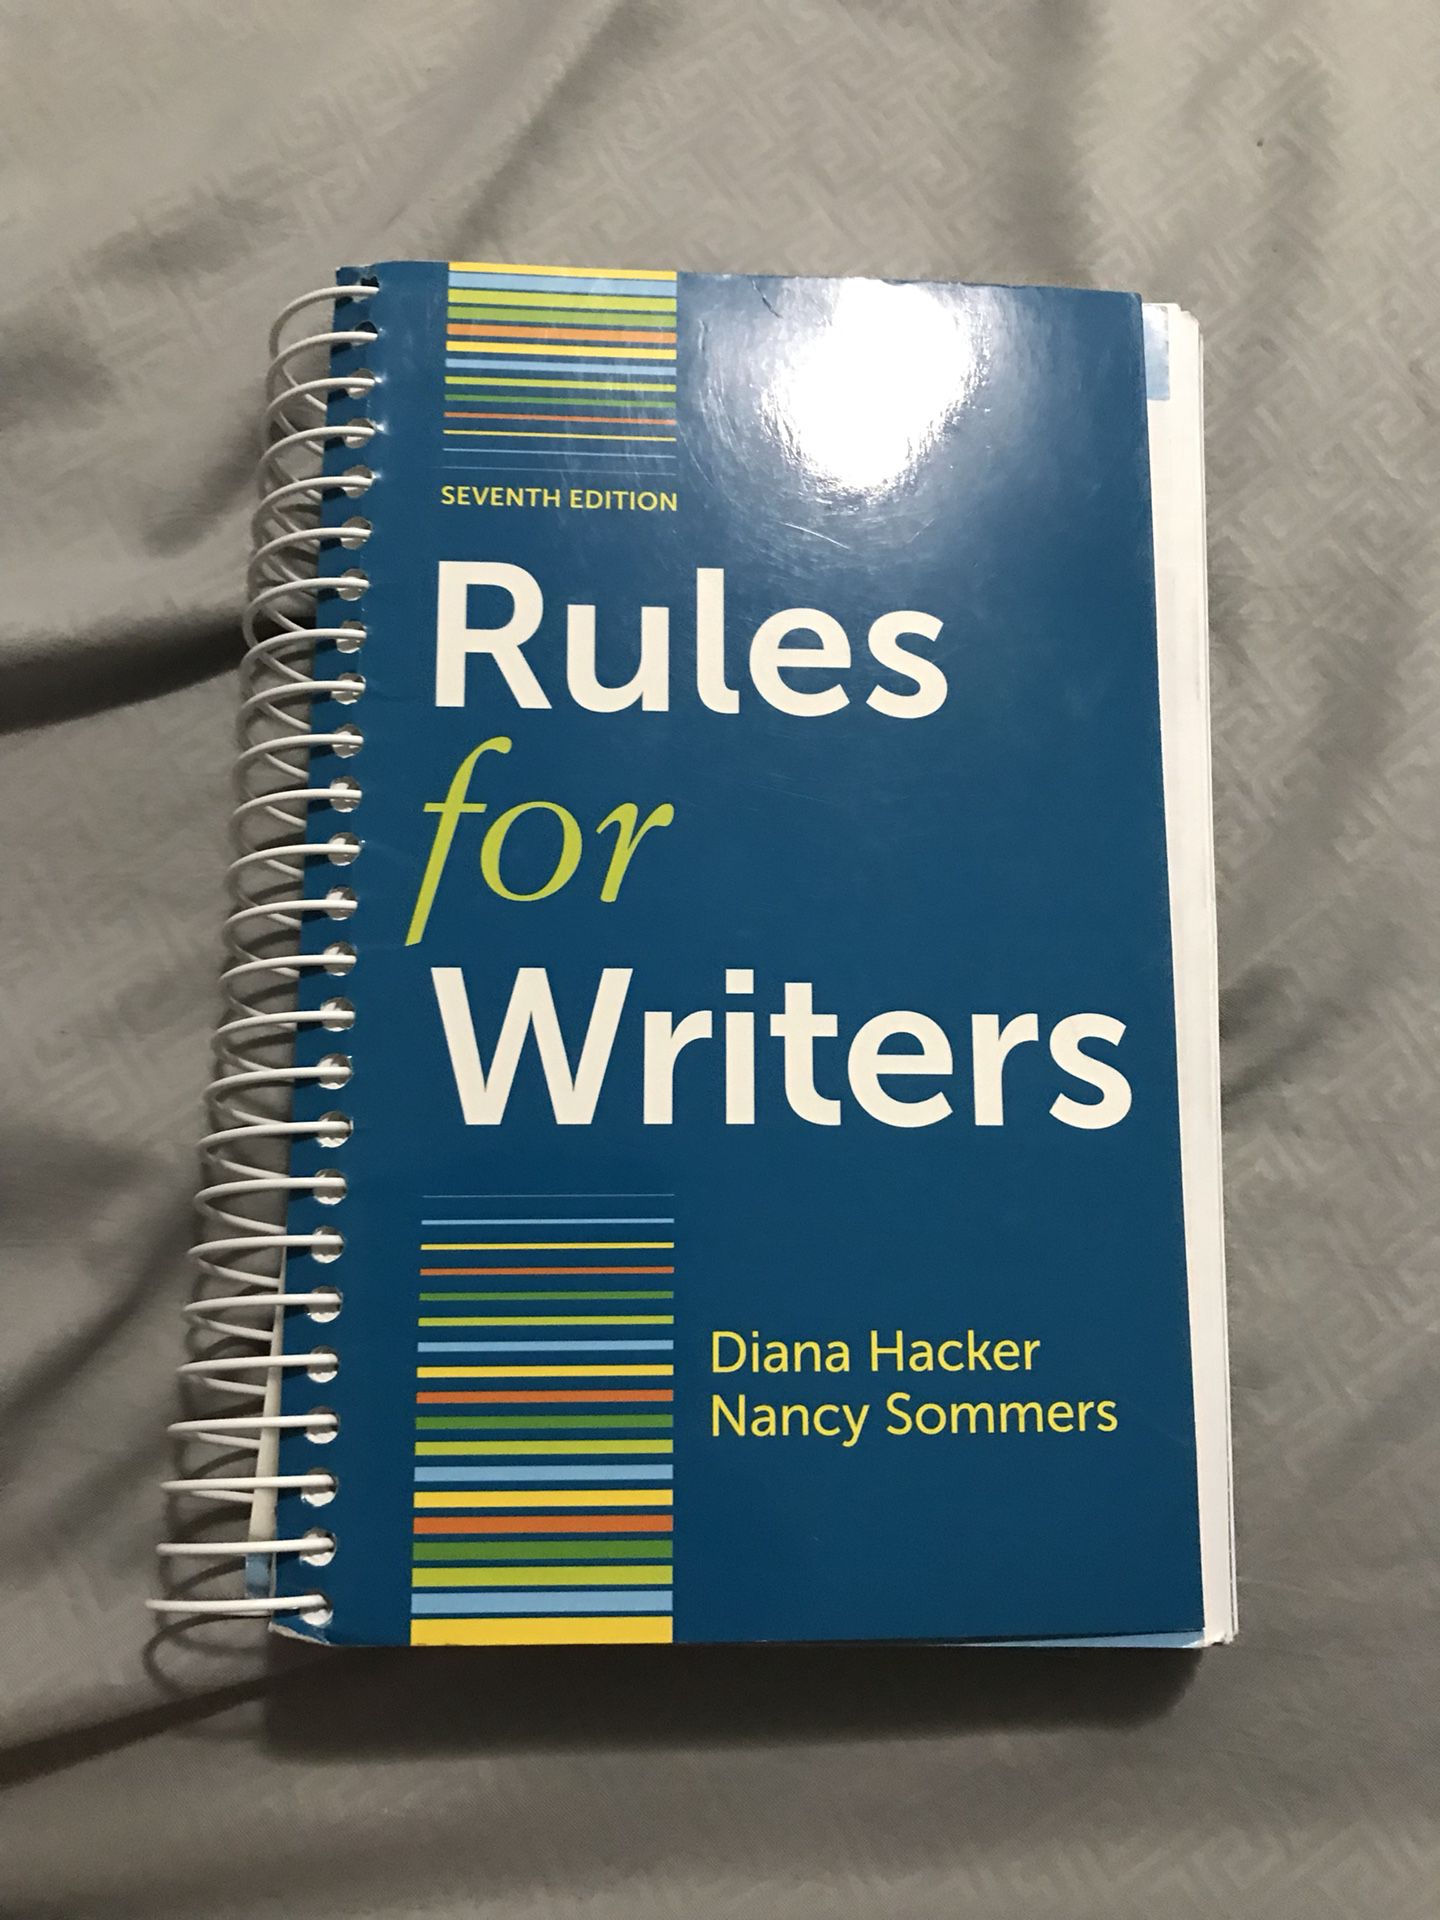 Rules for writing